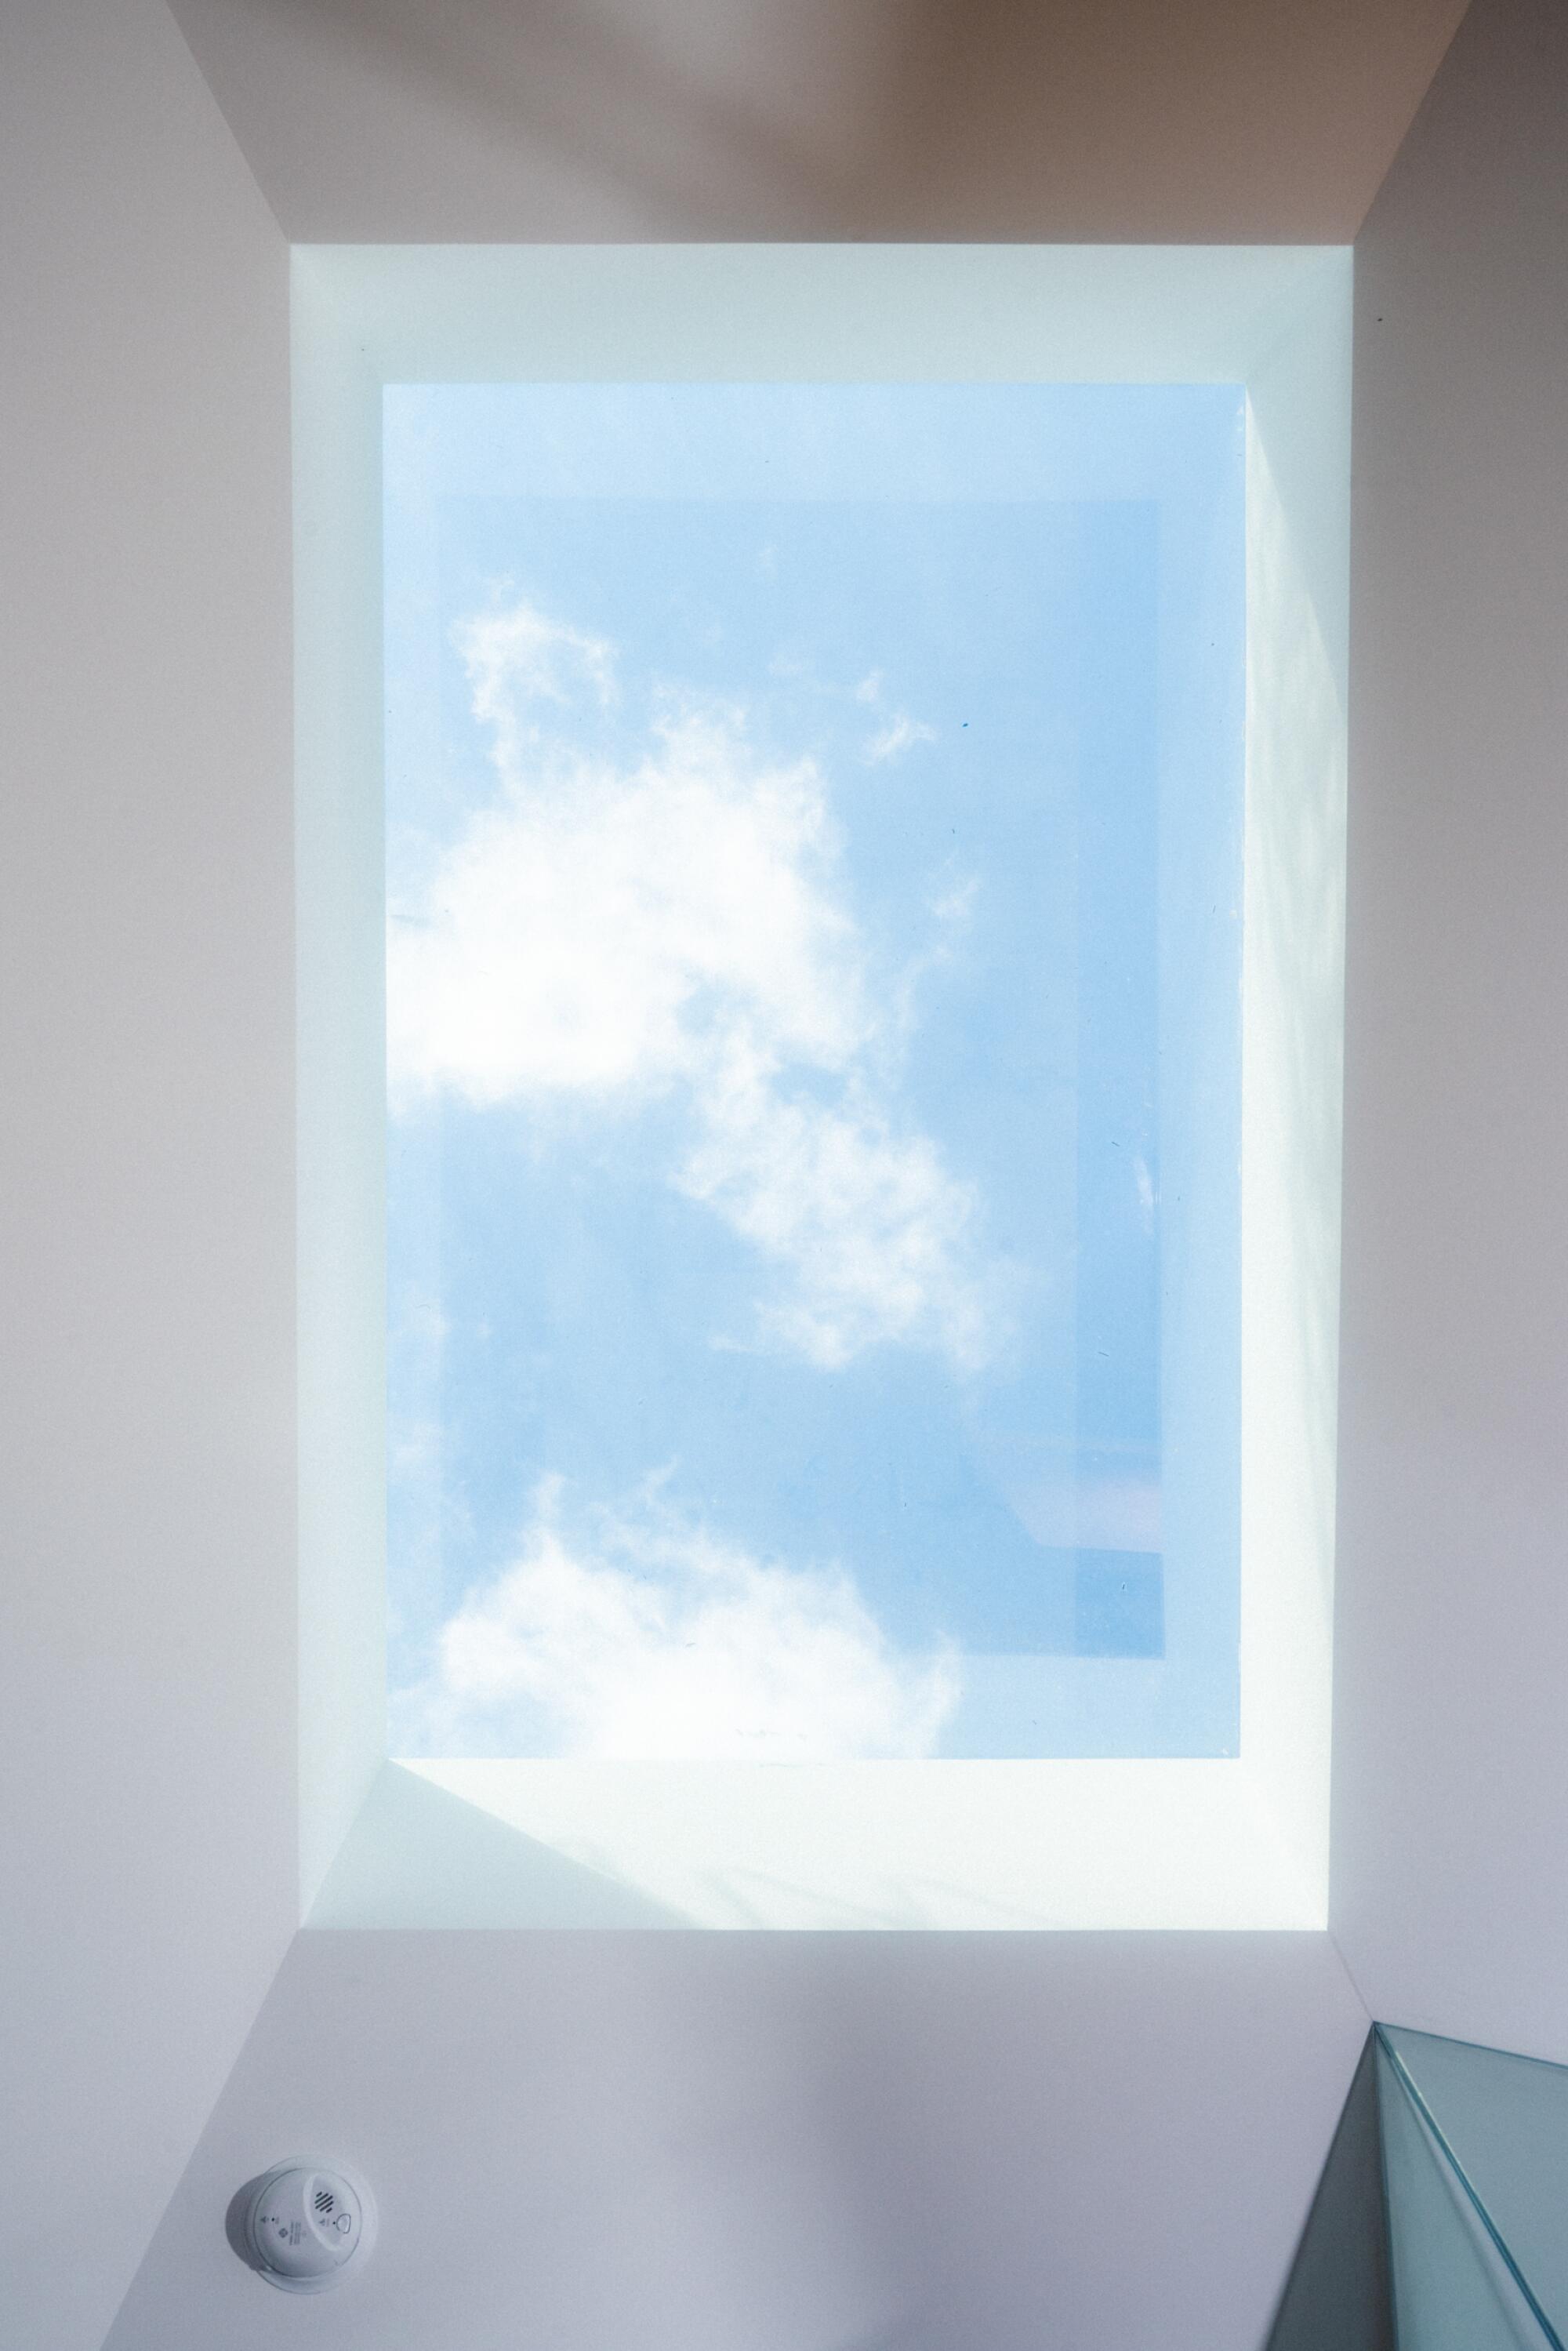 The image of a skylight showing a blue sky and a few clouds.